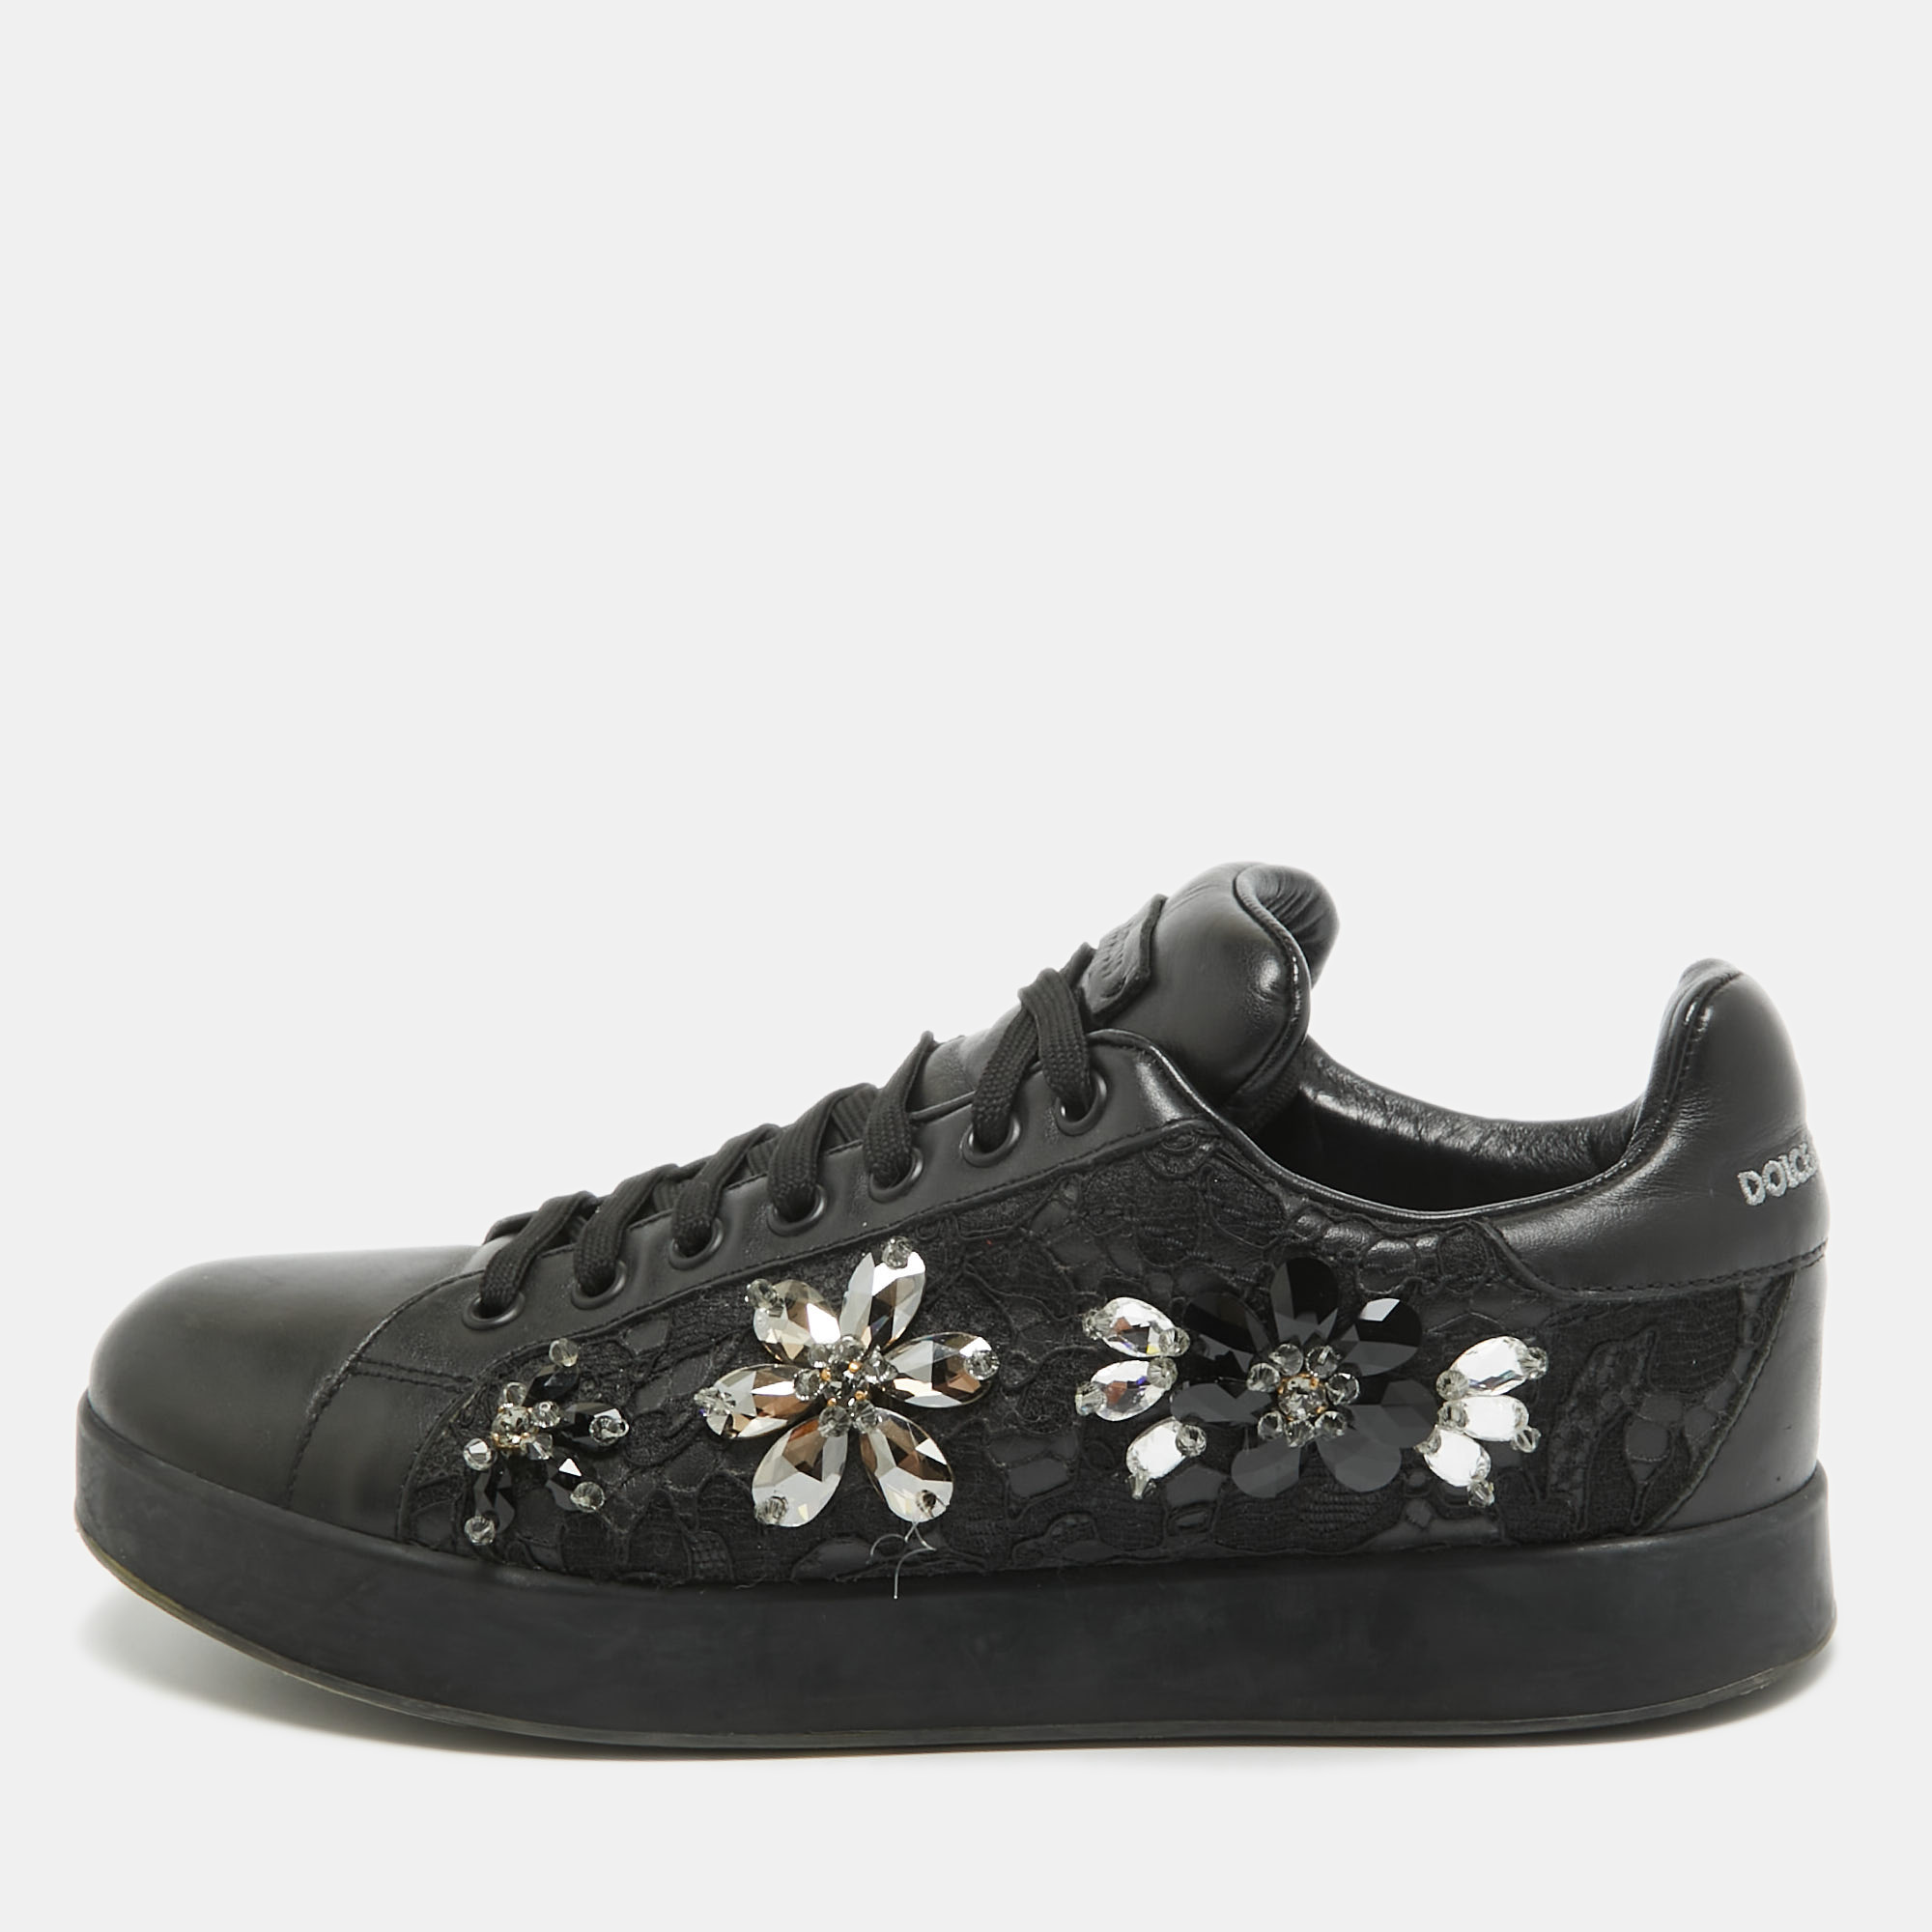 

Dolce & Gabbana Black Leather Crystal Embellished Low Top Sneakers Size